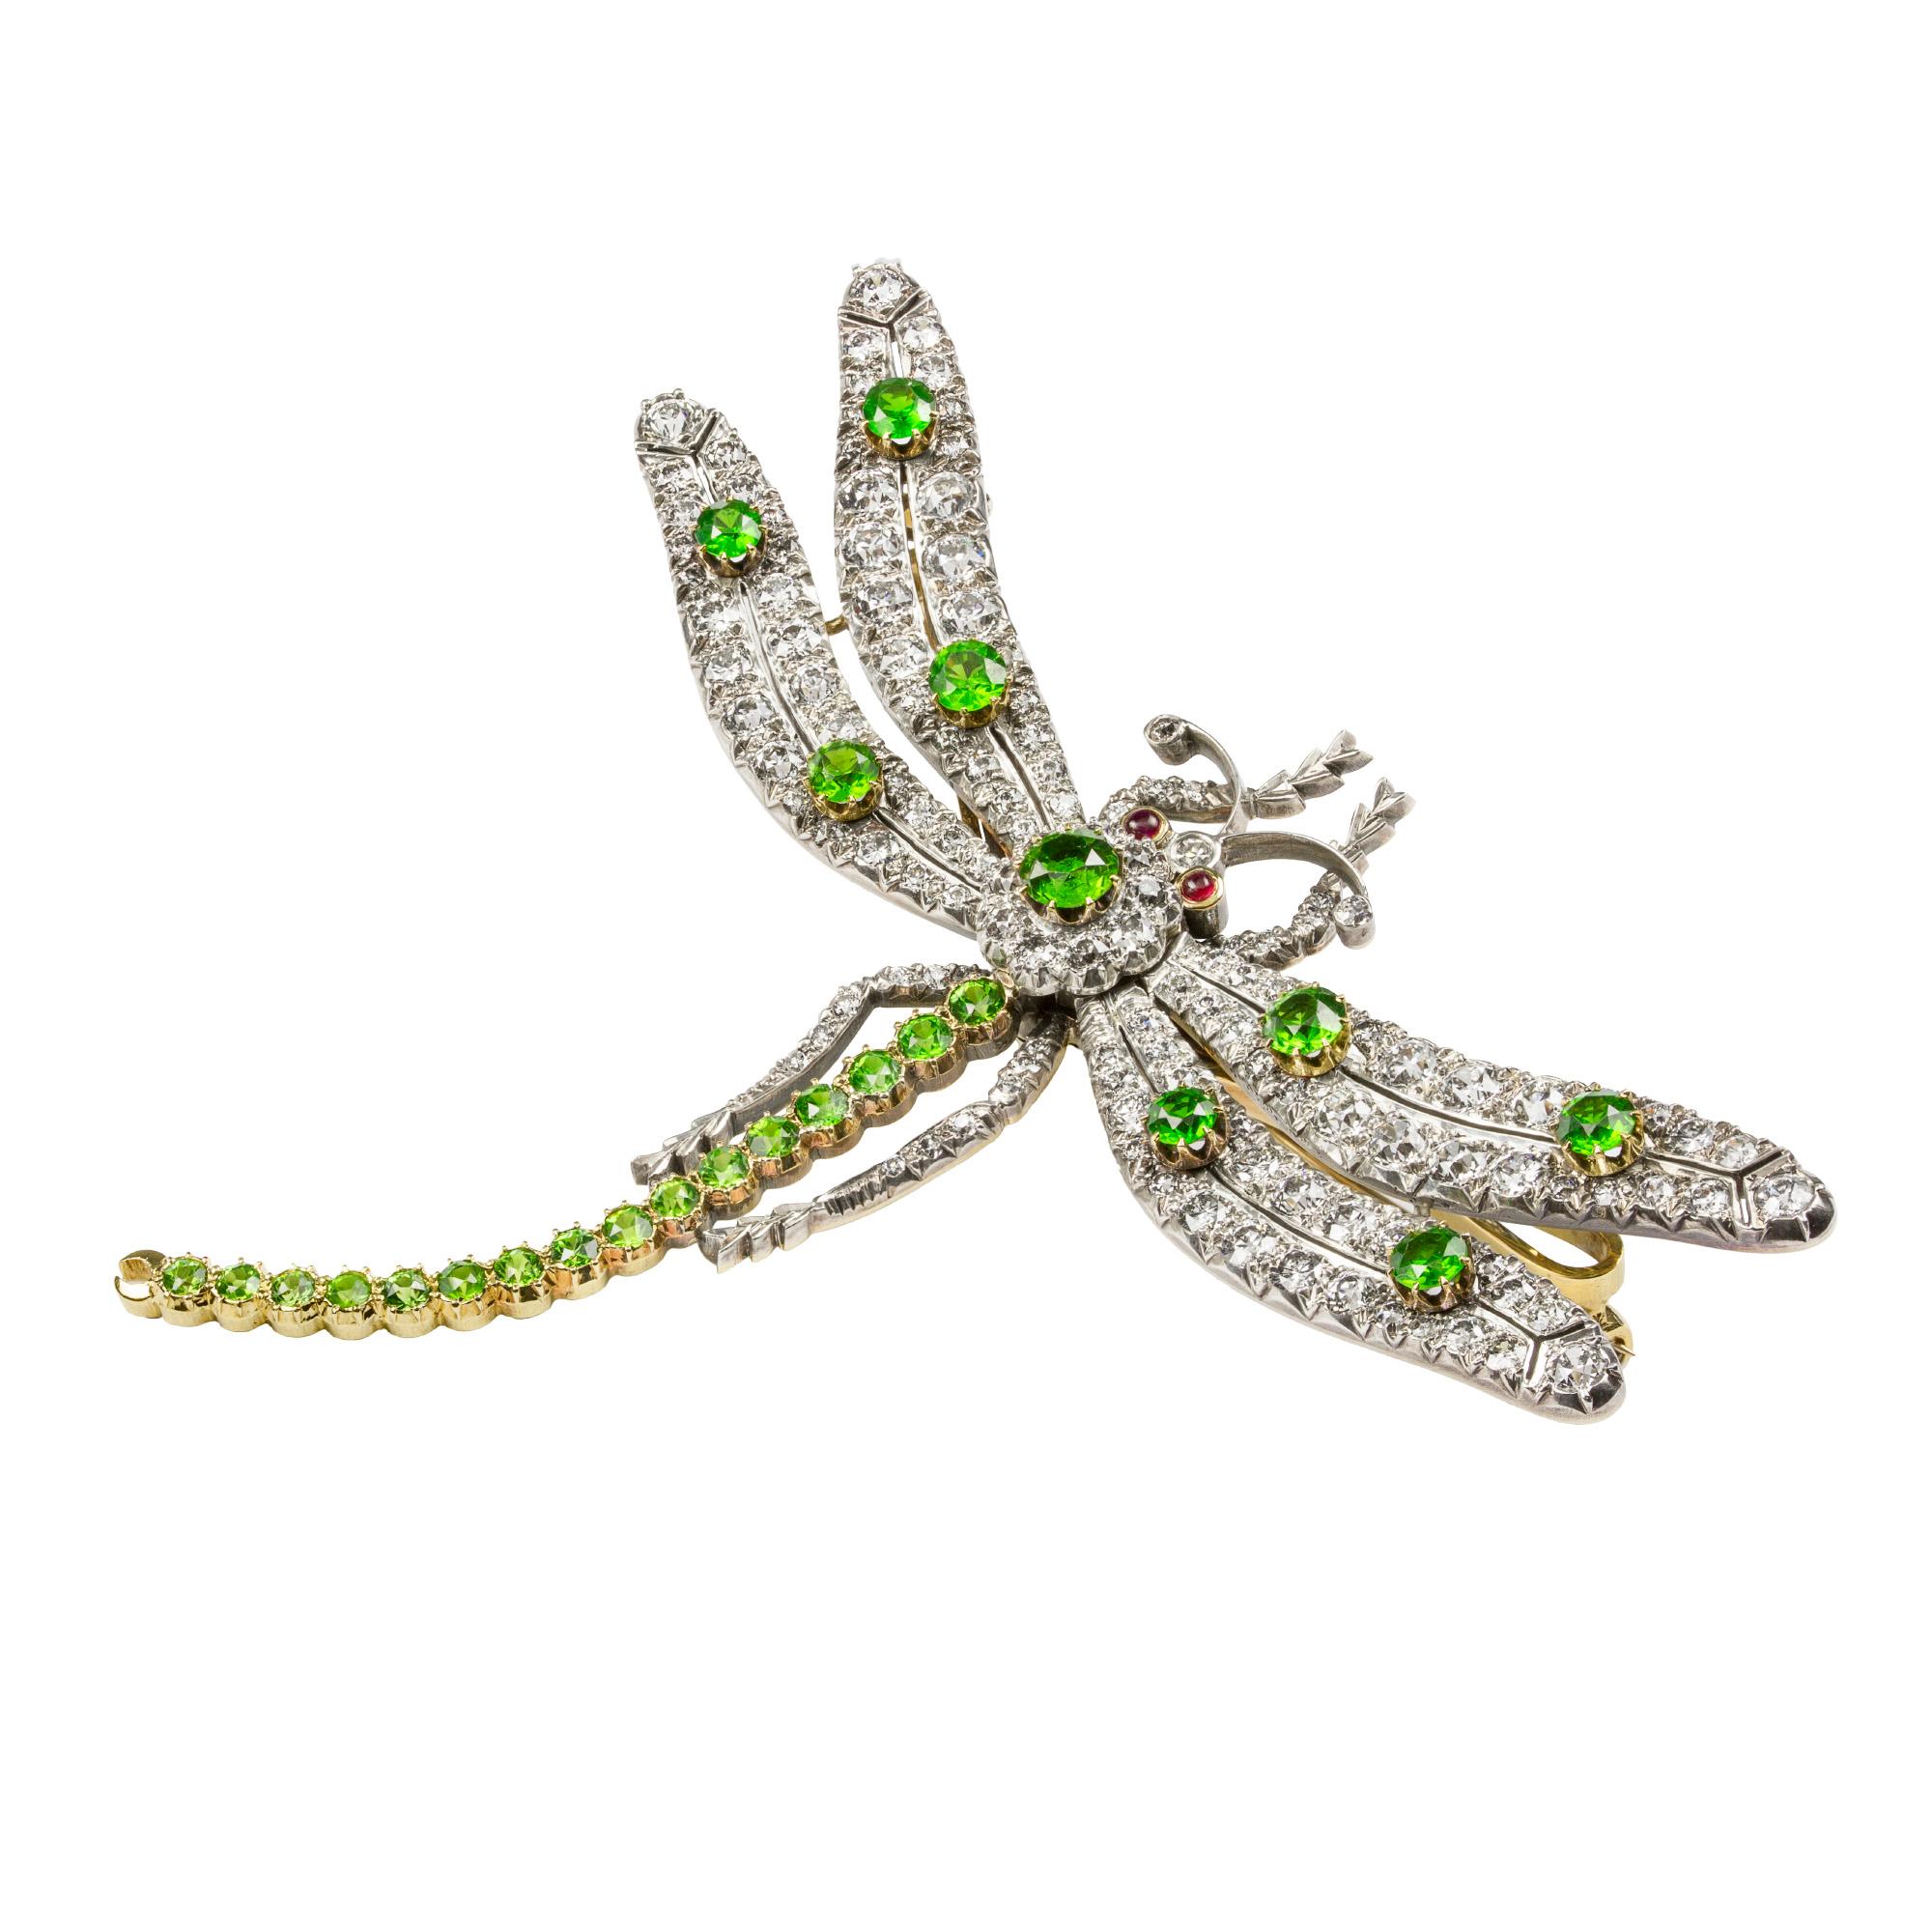 dragonfly brooch meaning